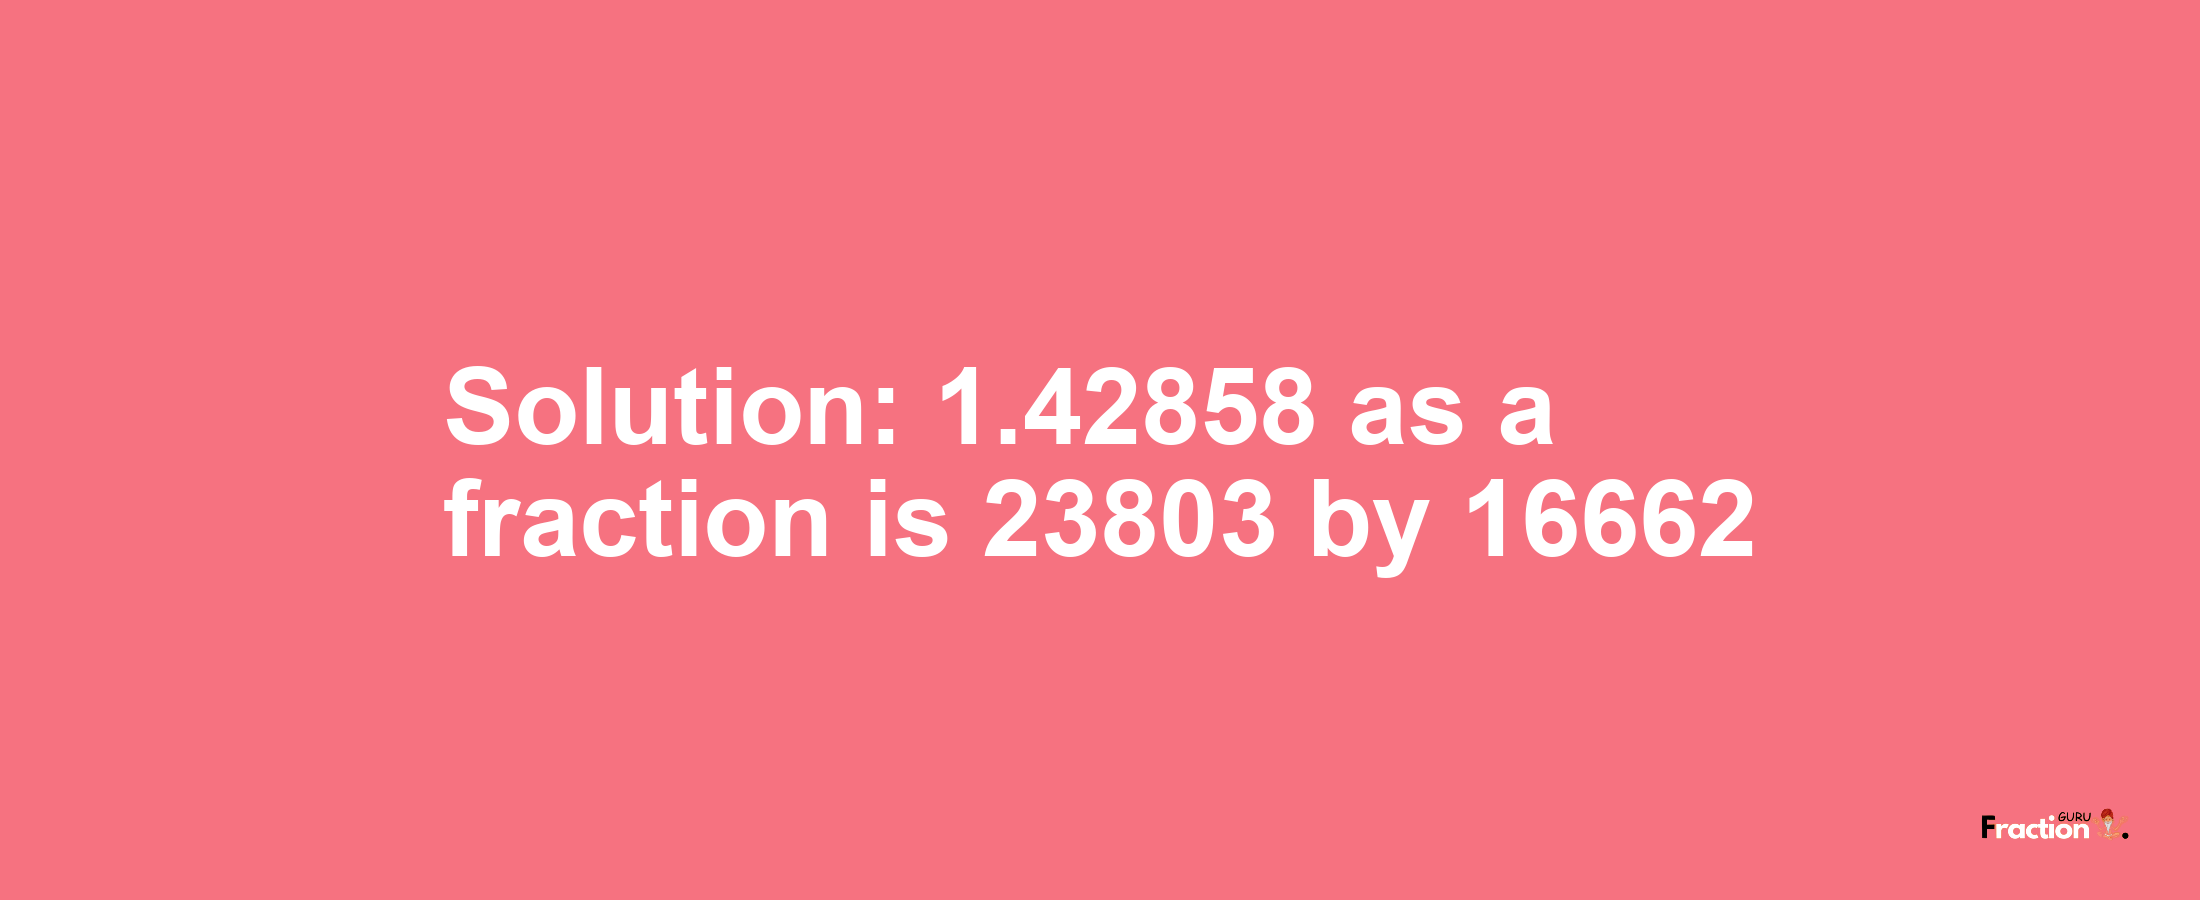 Solution:1.42858 as a fraction is 23803/16662